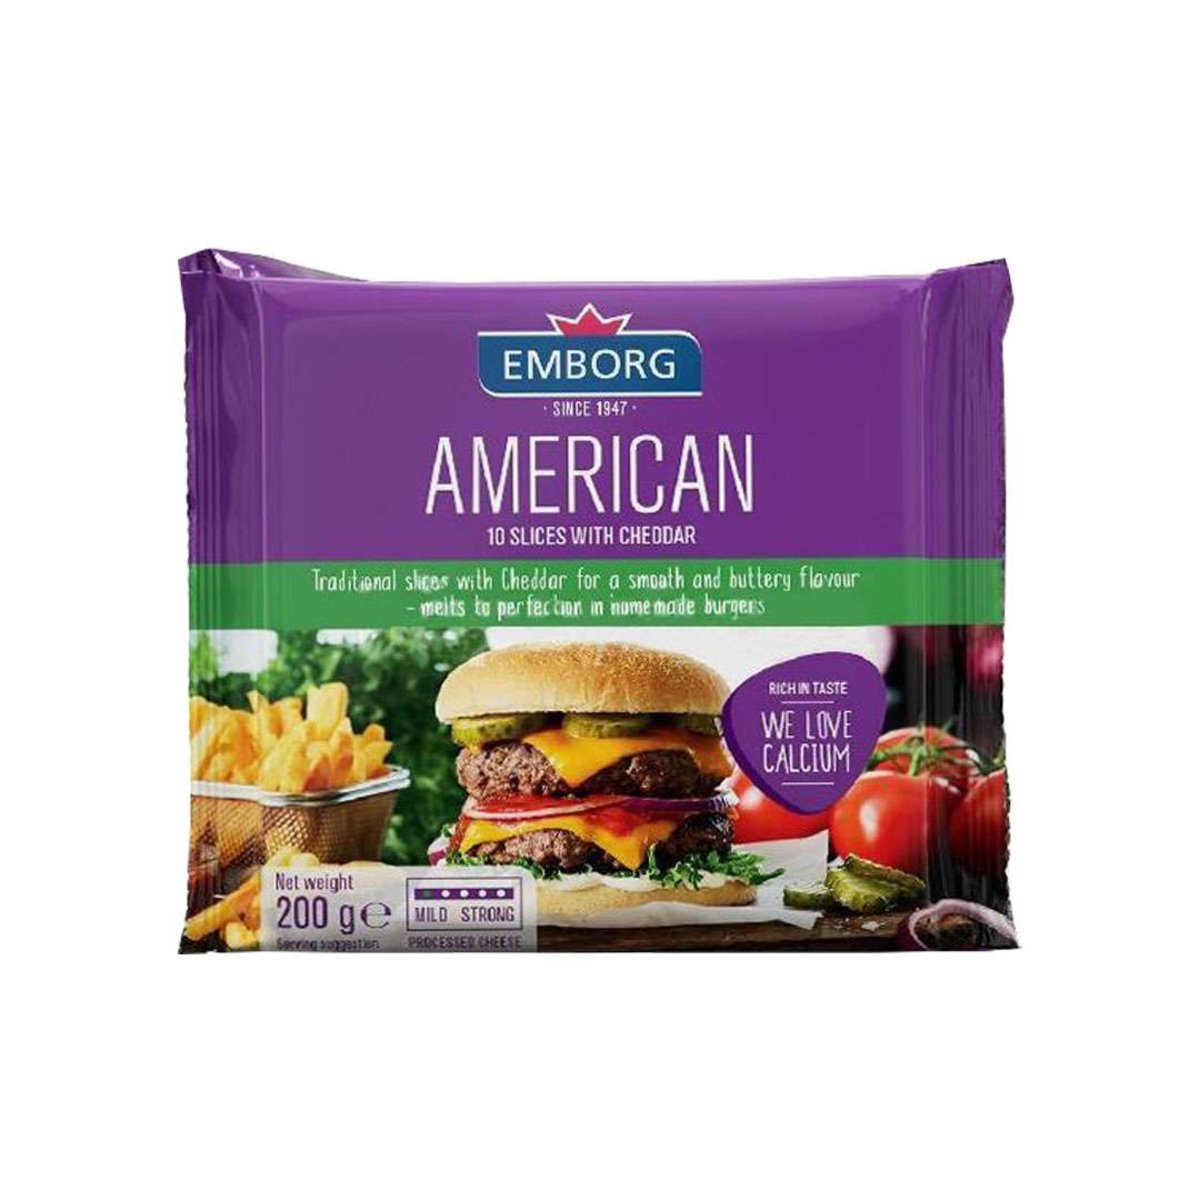 Emborg American 10 Slices With Cheddar 200g